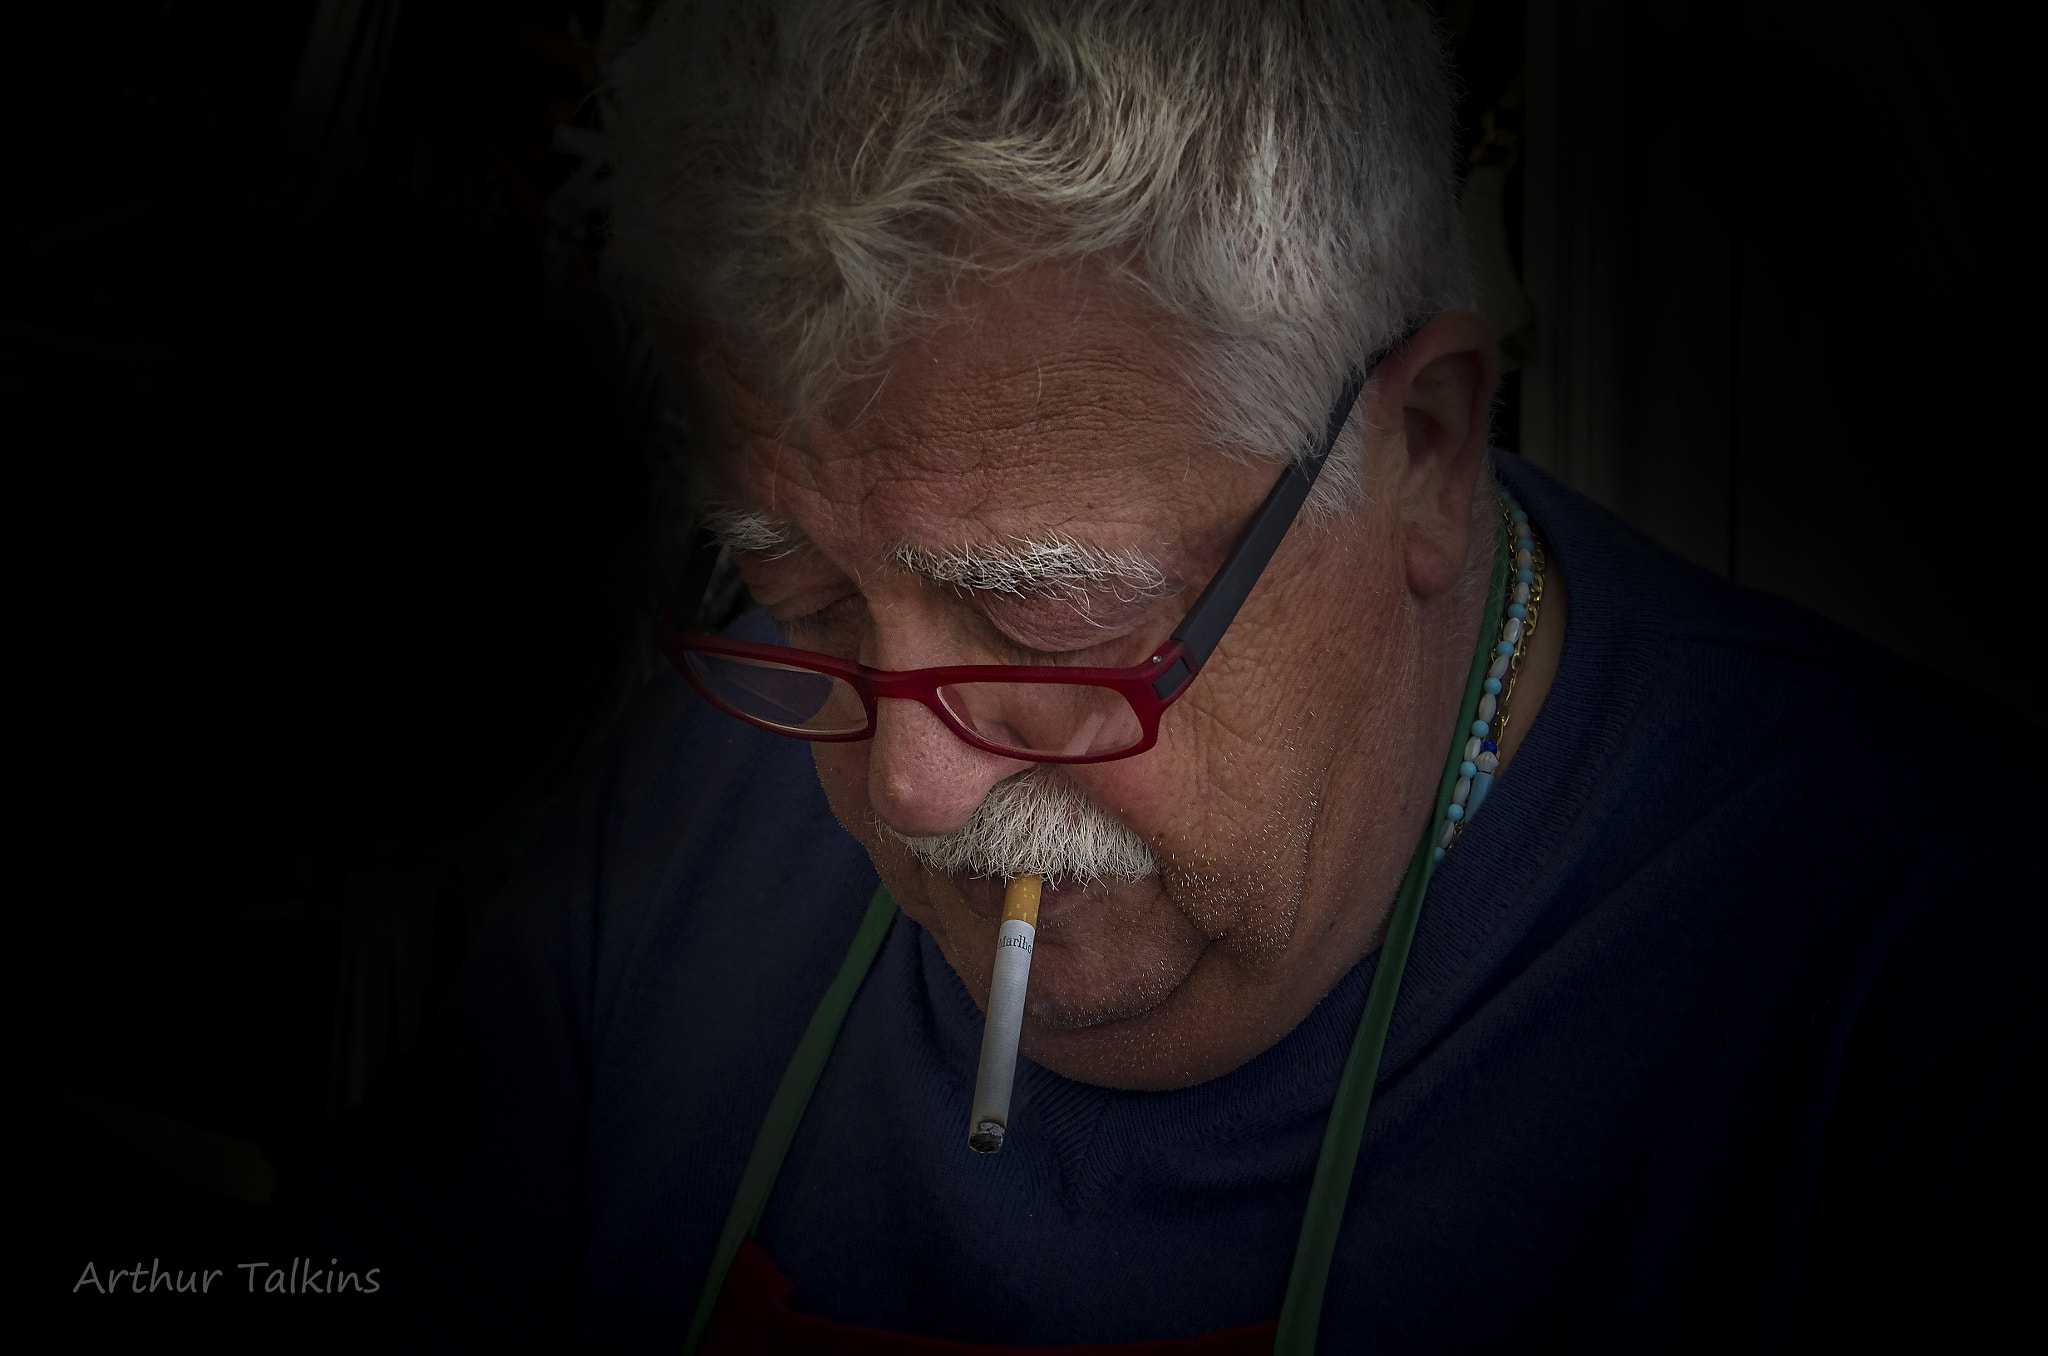 Pentax K-5 sample photo. Smoking and concentrating...hand in hand... photography